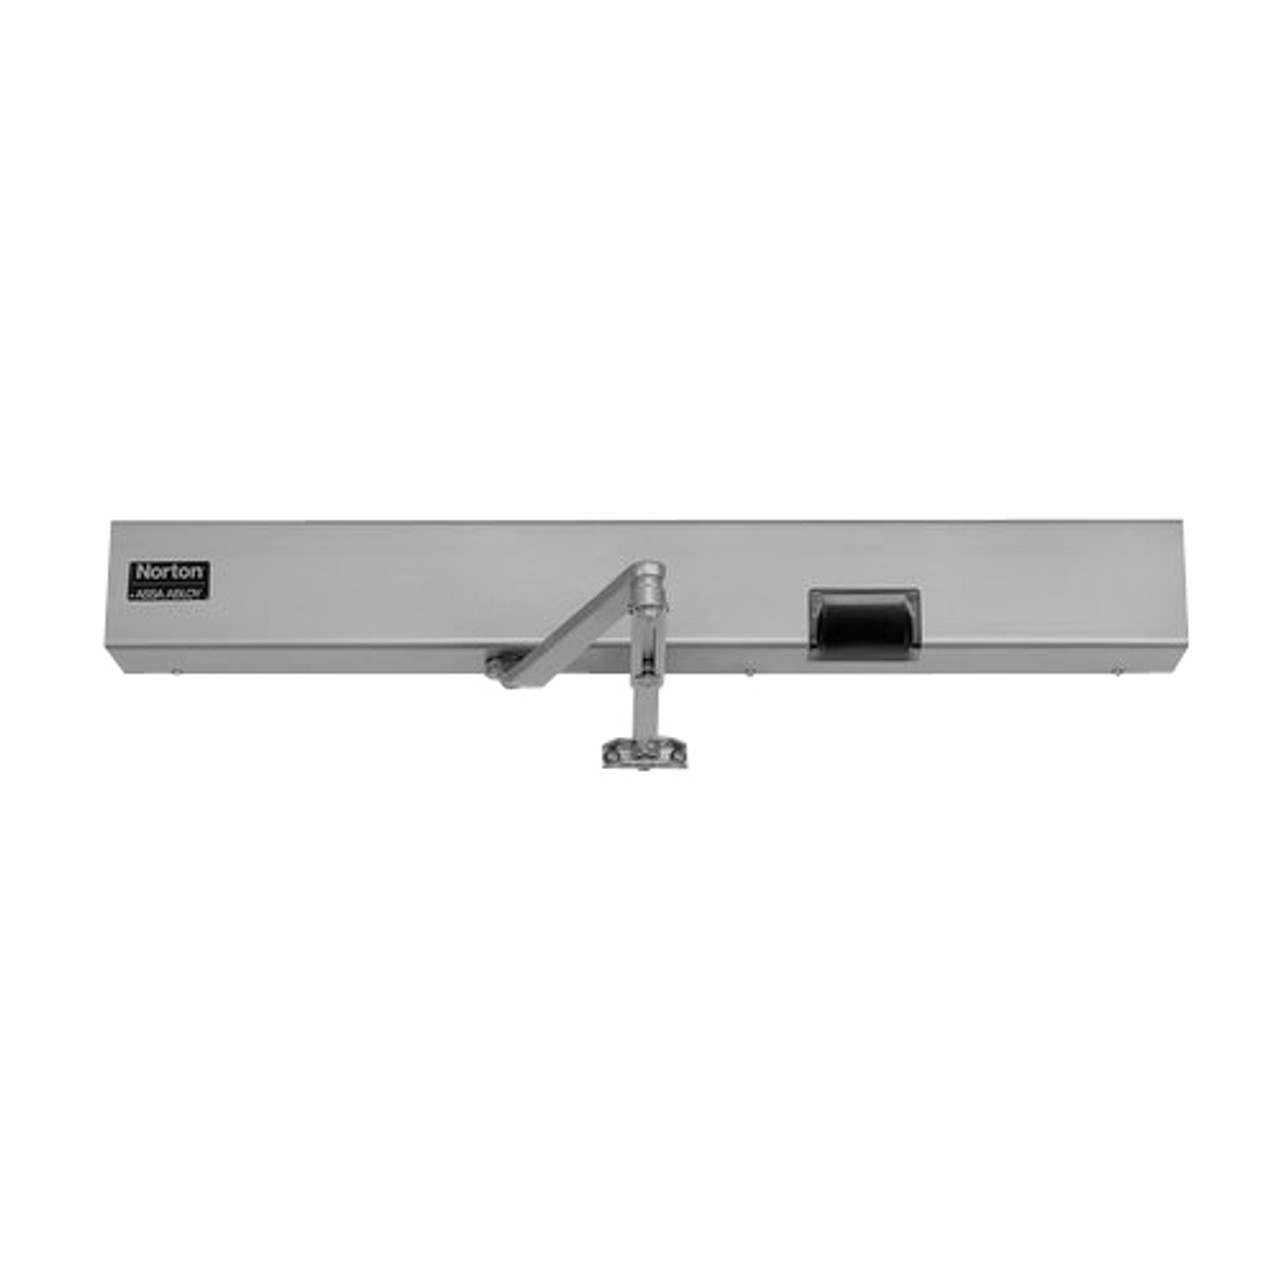 7124SZ-LH-120VAC-689 Norton 7100SZ Series Safe Zone Multi-Point Closer/Holder with Motion Sensor and Push Side Double Lever 11 inch Main Arm in Aluminum Finish